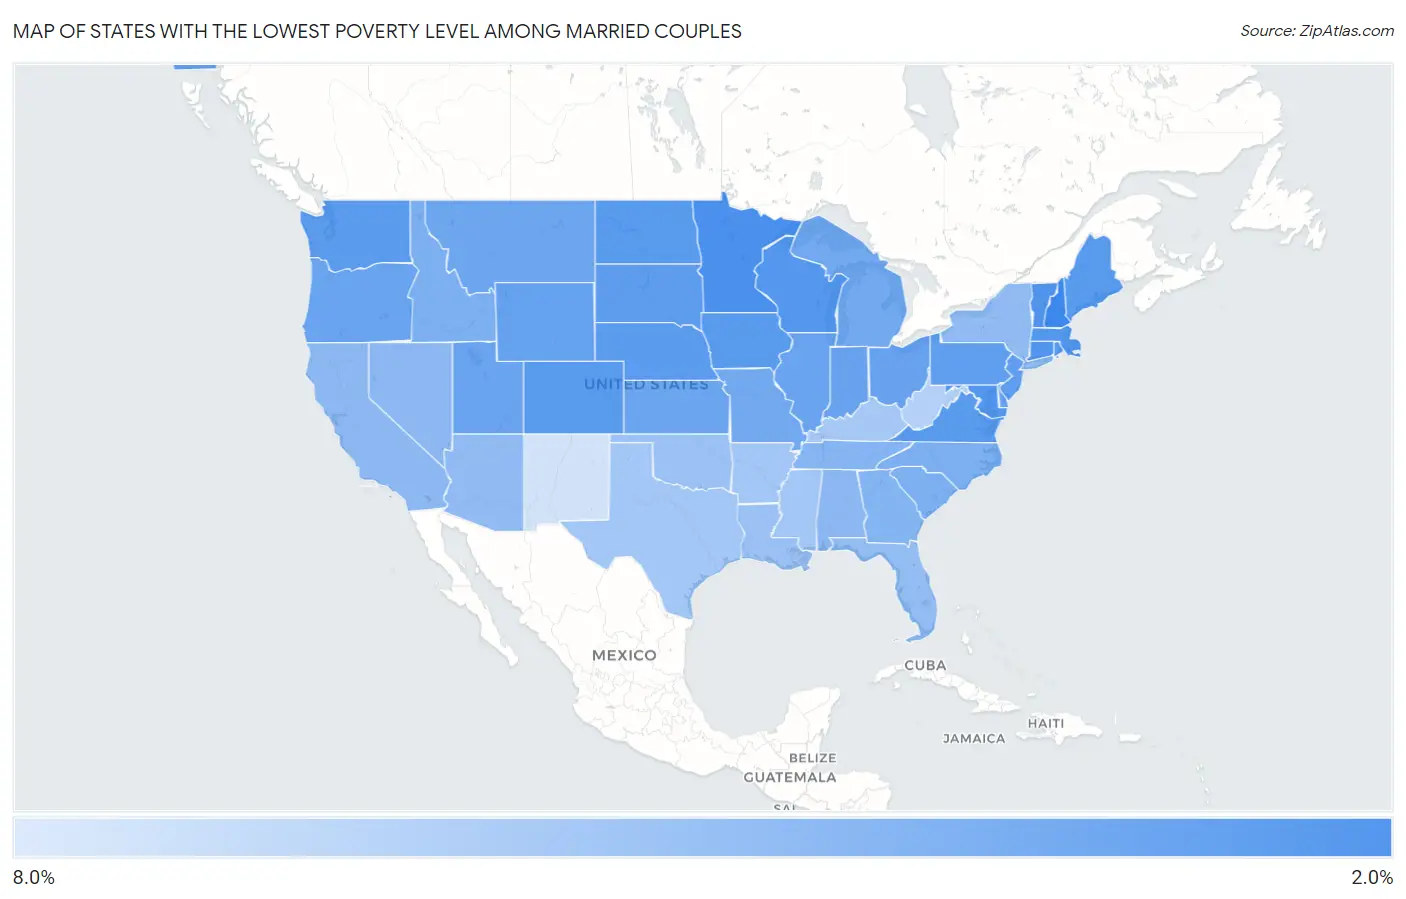 States with the Lowest Poverty Level Among Married Couples in the United States Map